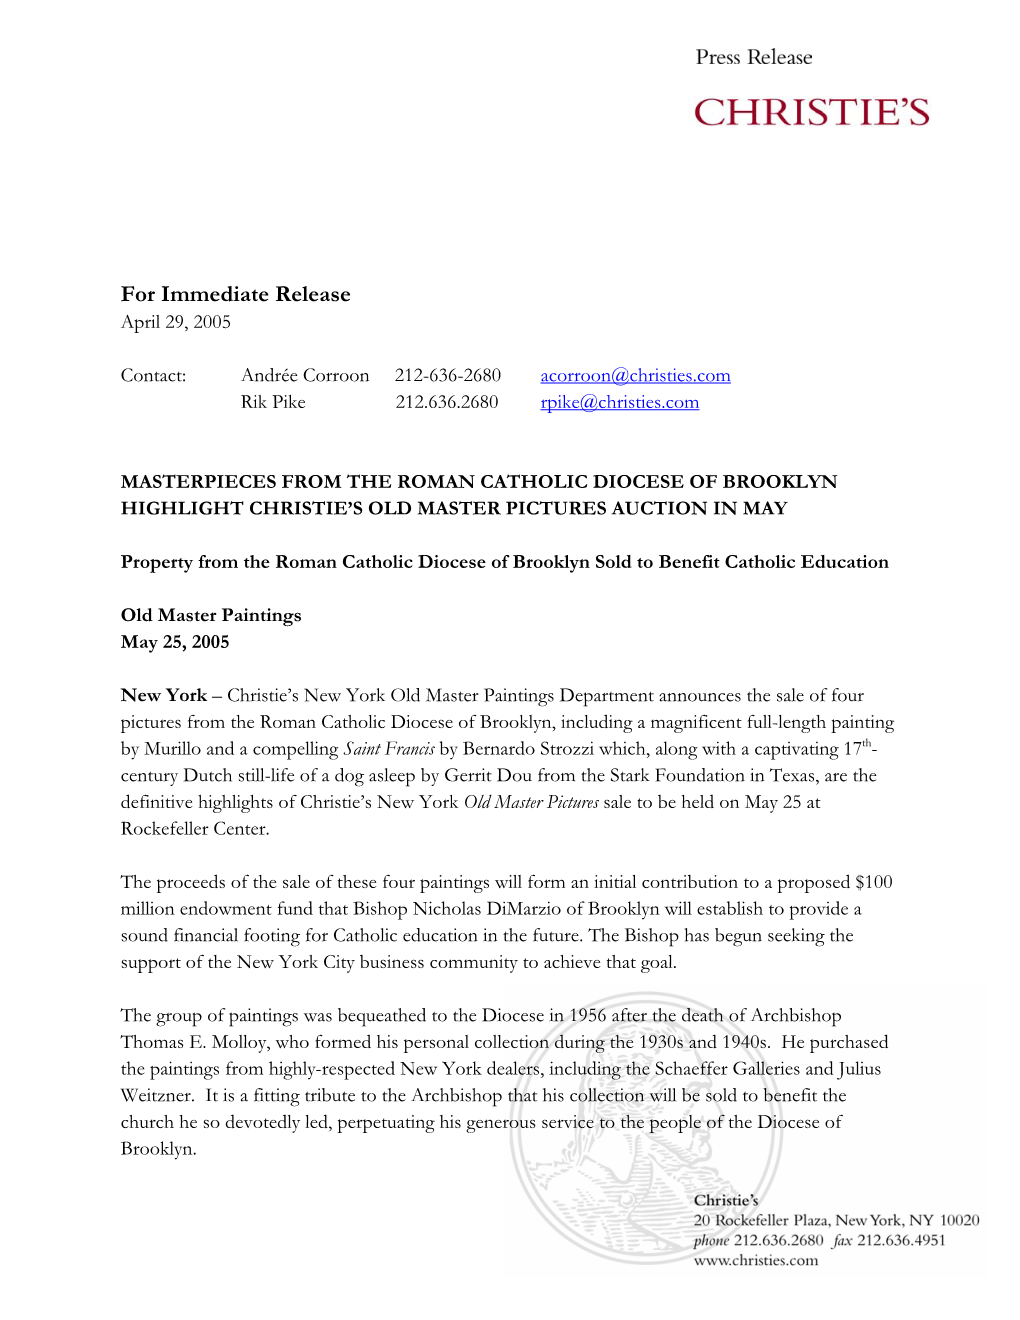 For Immediate Release April 29, 2005